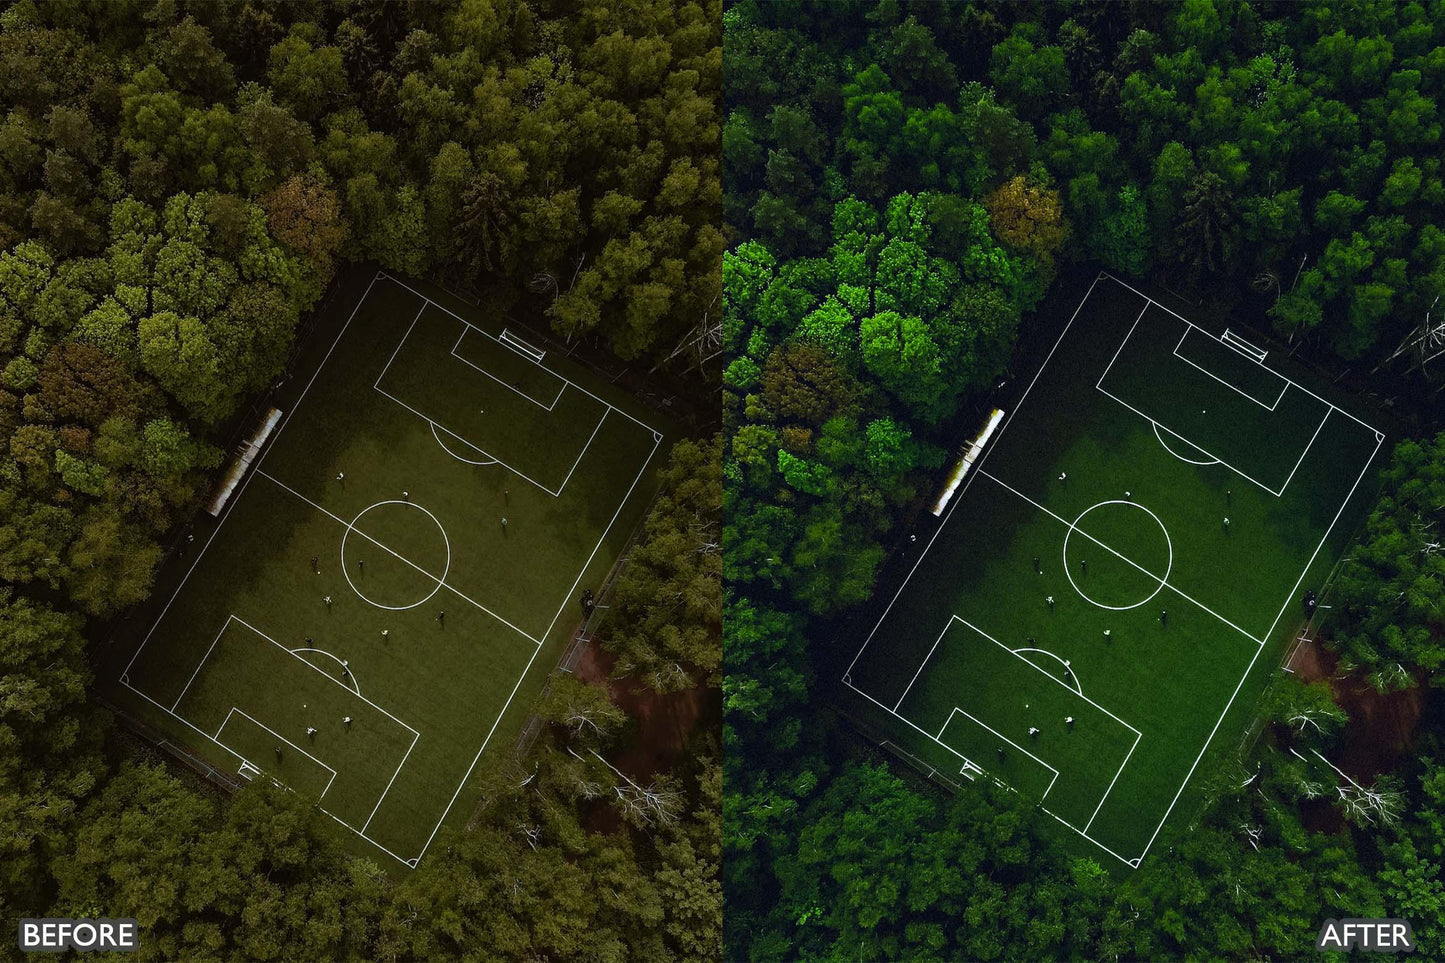 50 Aerial & Drone Photography Lightroom Presets - adobe lightroom presets, Blogger presets, Cinematic Presets, Drone presets, instagram presets, landscape presets, lightroom presets, moody presets, presets before and after, professional lightroom presets - aaapresets.com